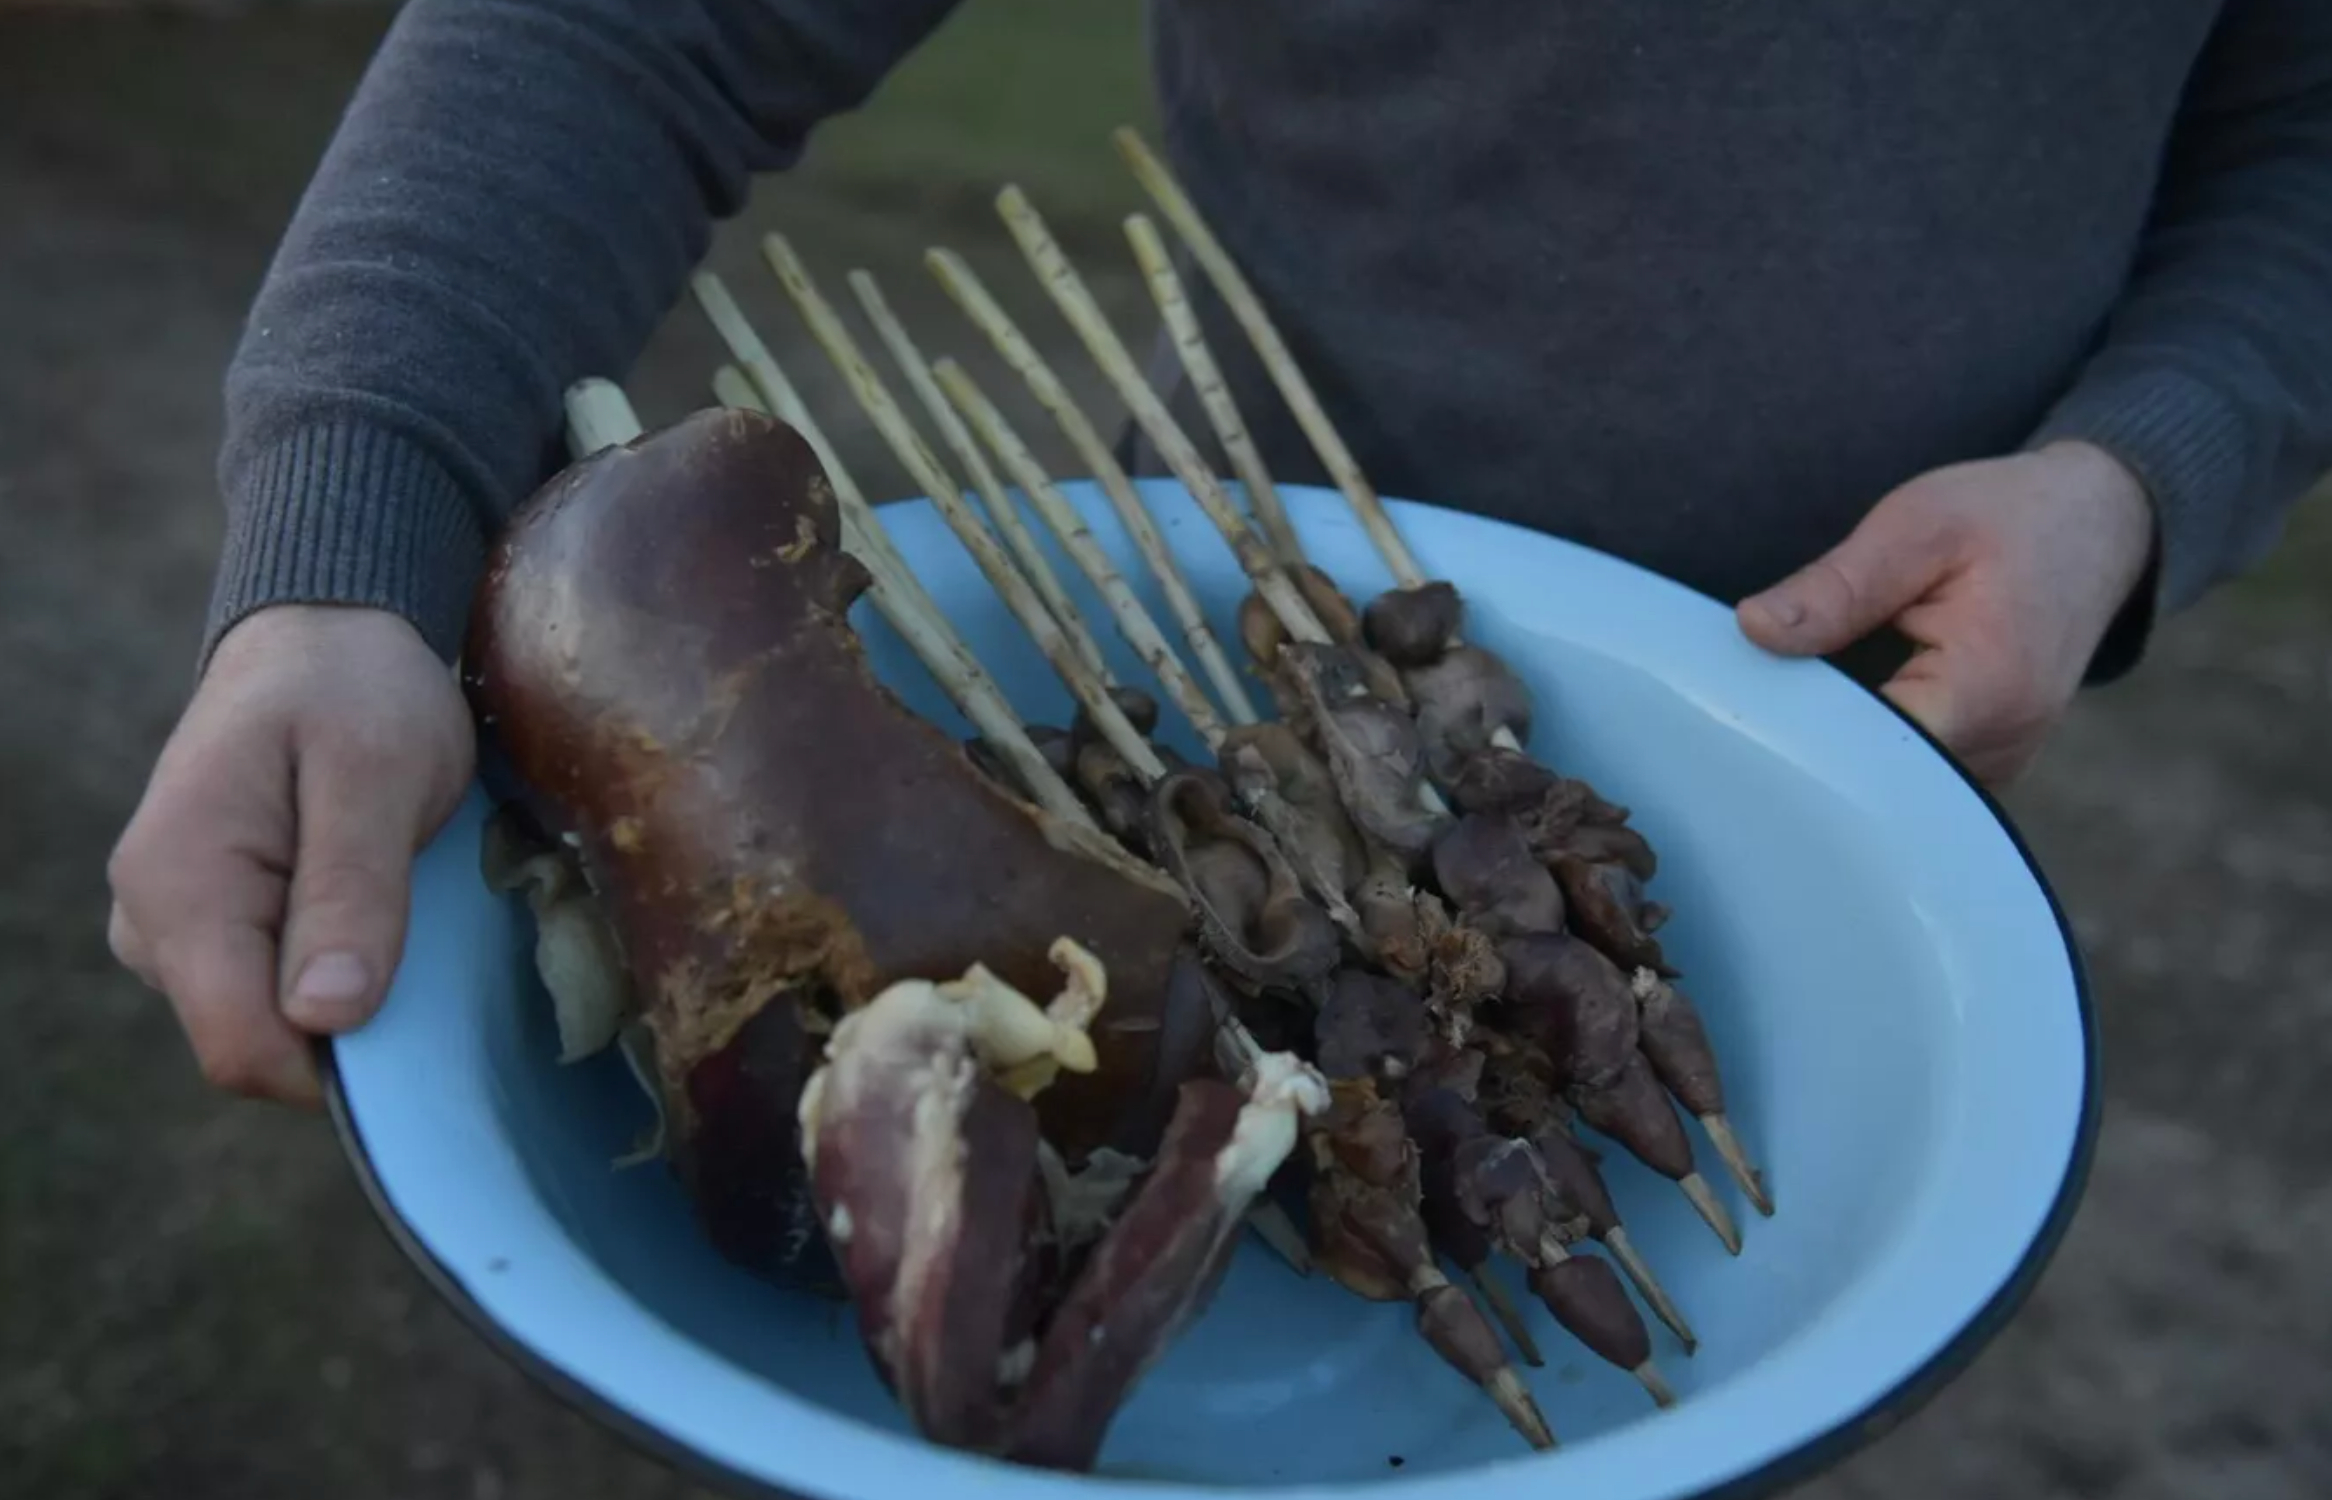 The heart and liver of the sacrificial animal are threaded onto walnut sticks.